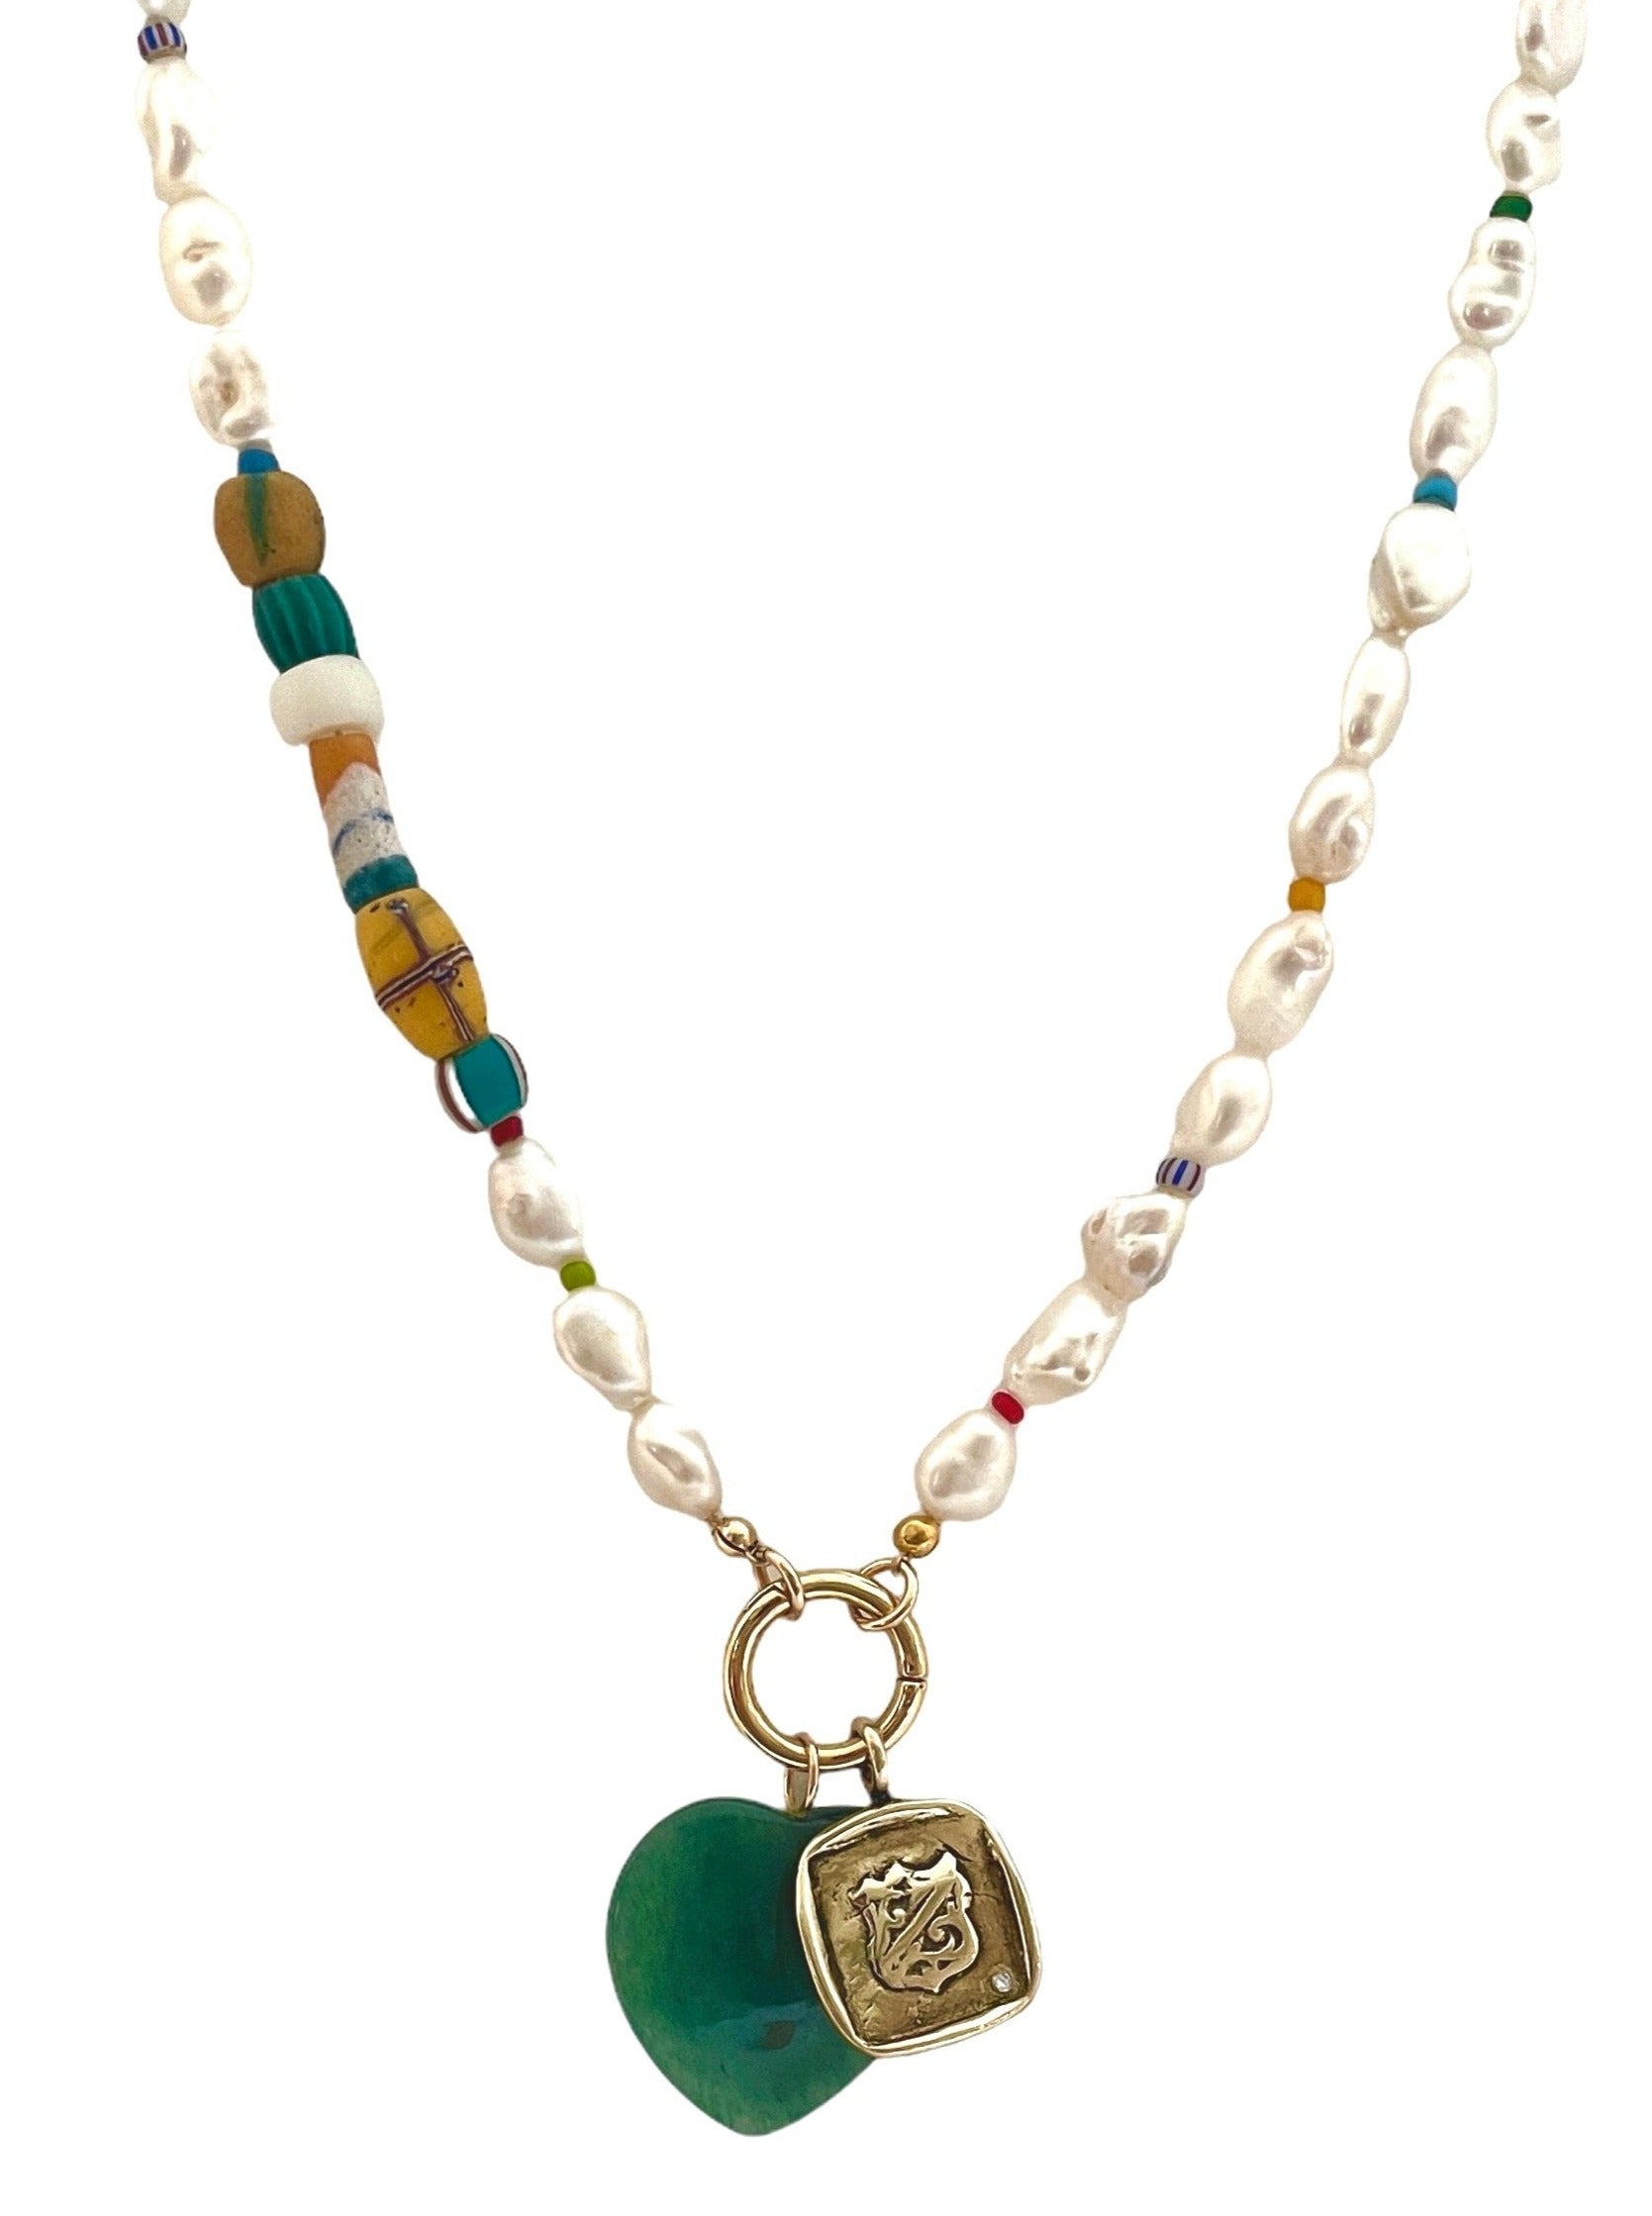 Protective Jade & Pearl Necklace